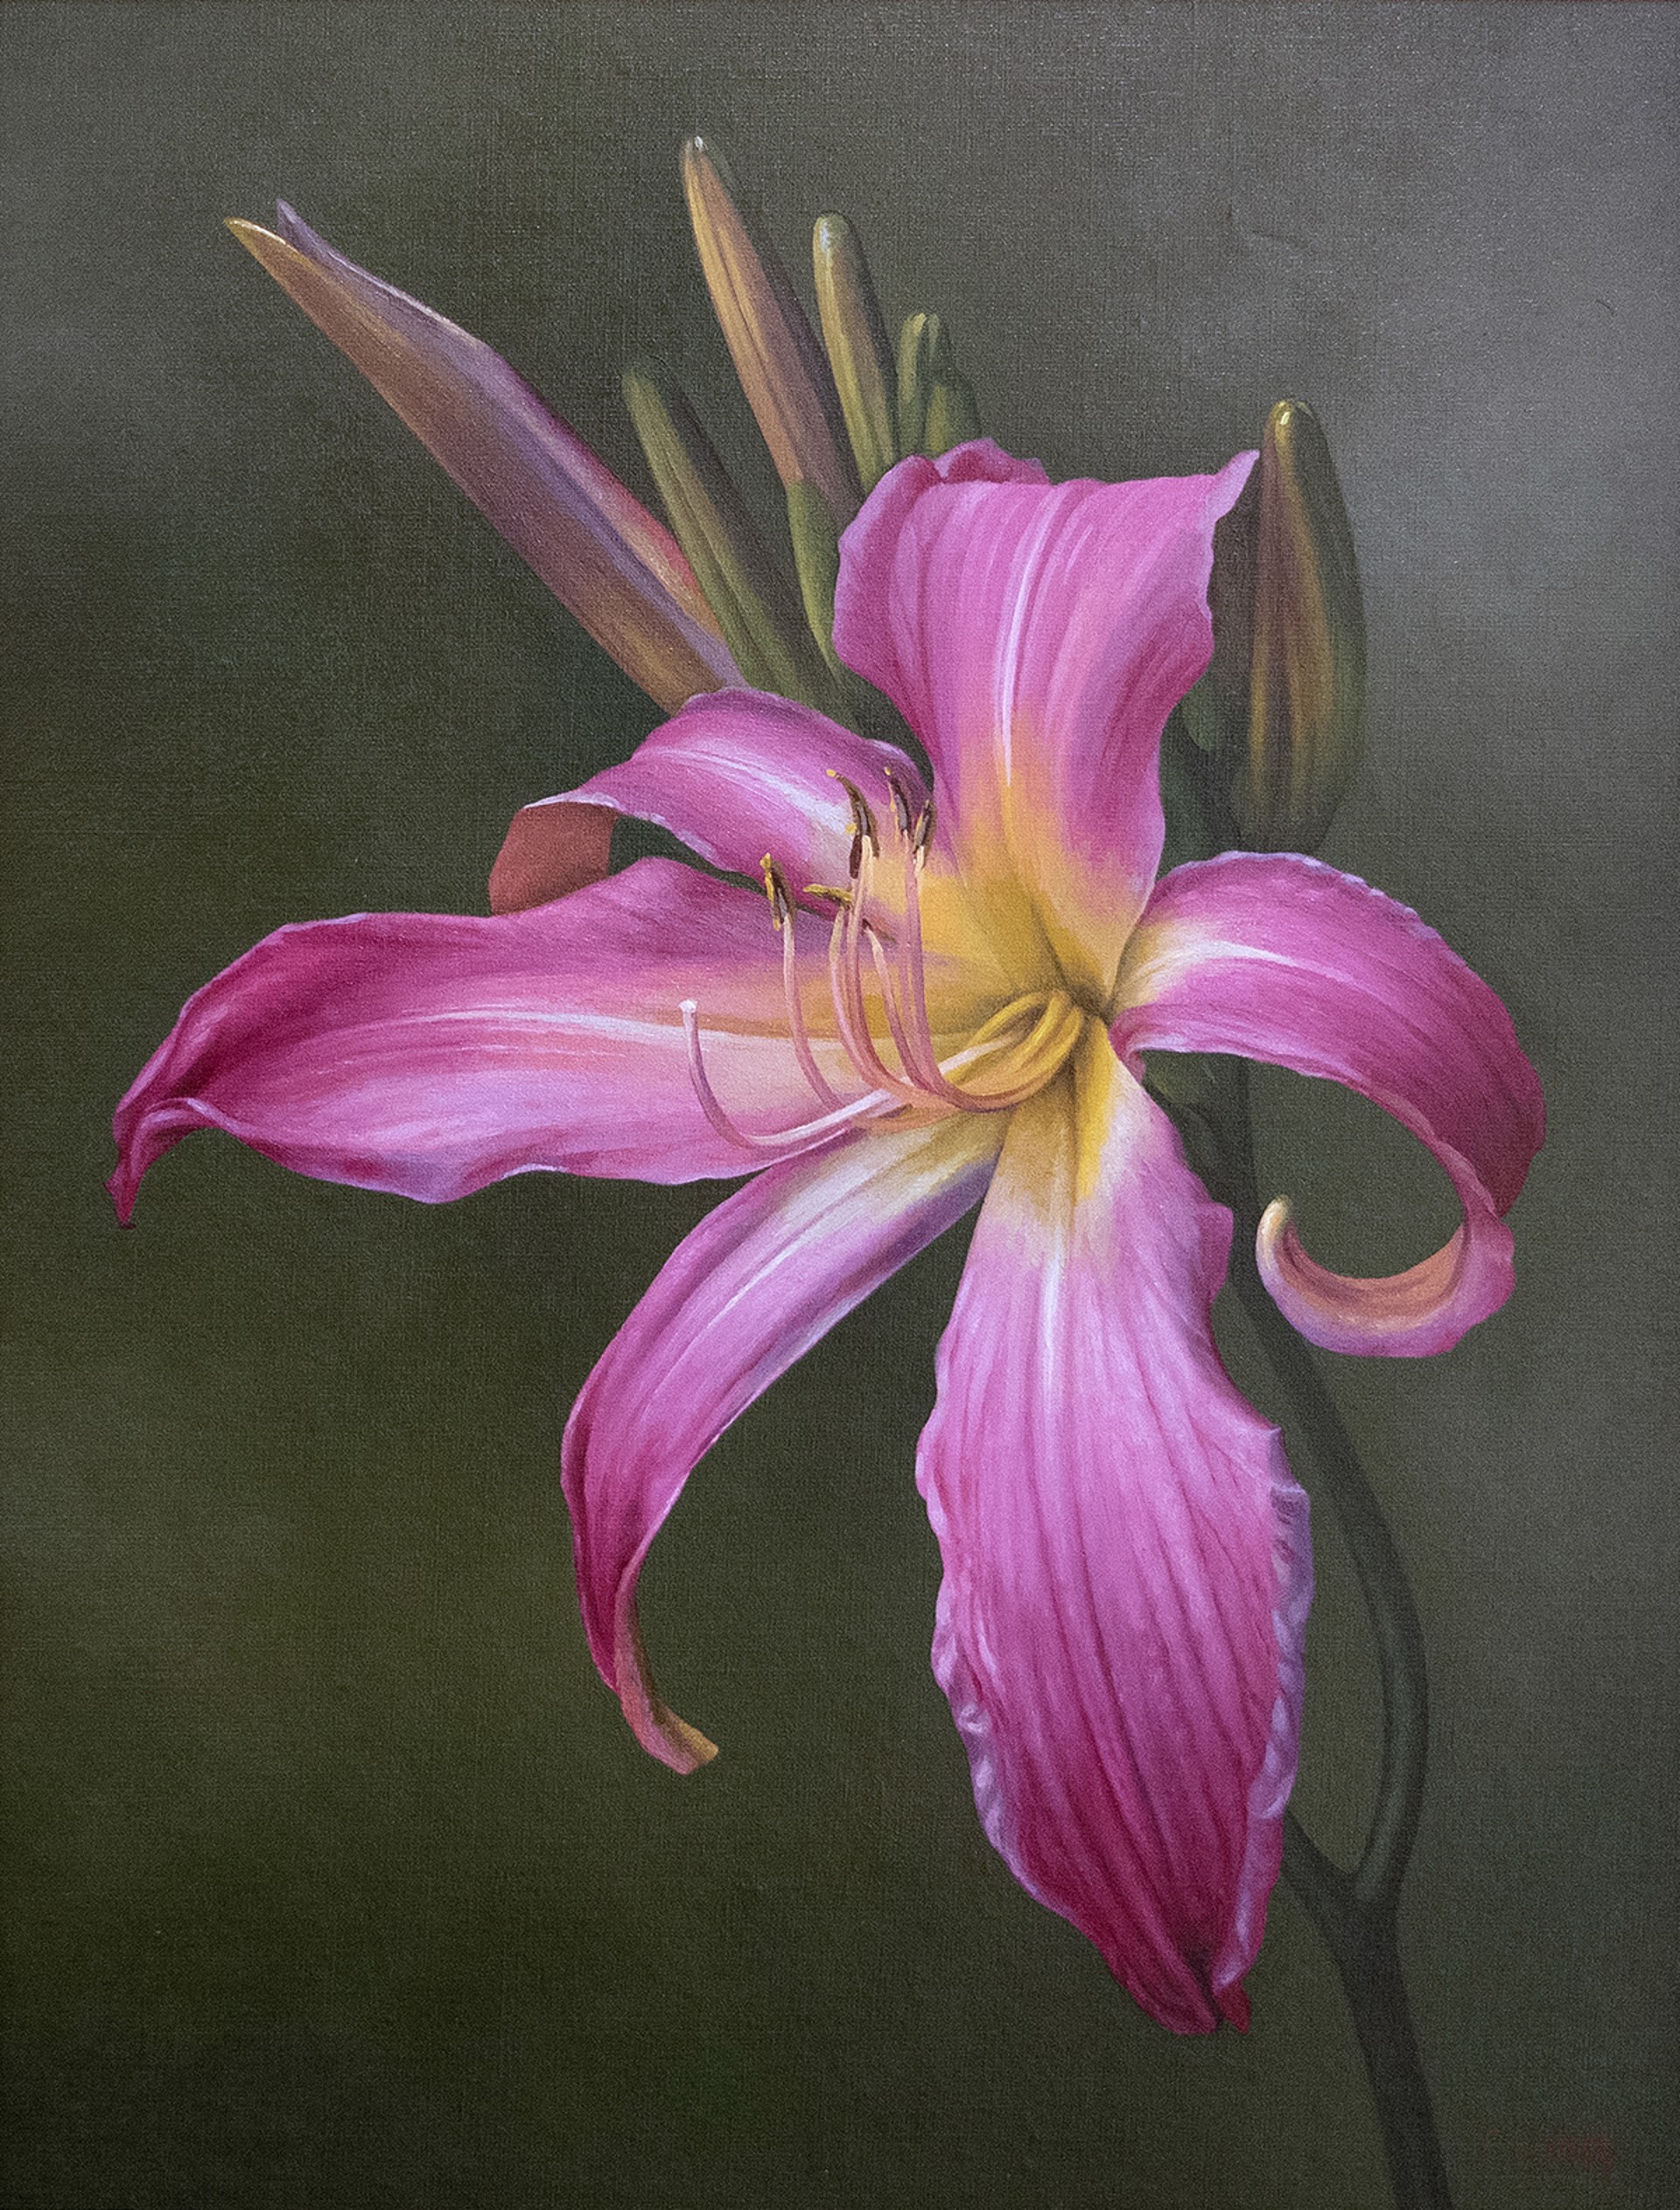 Daylily by Trish Coonrod